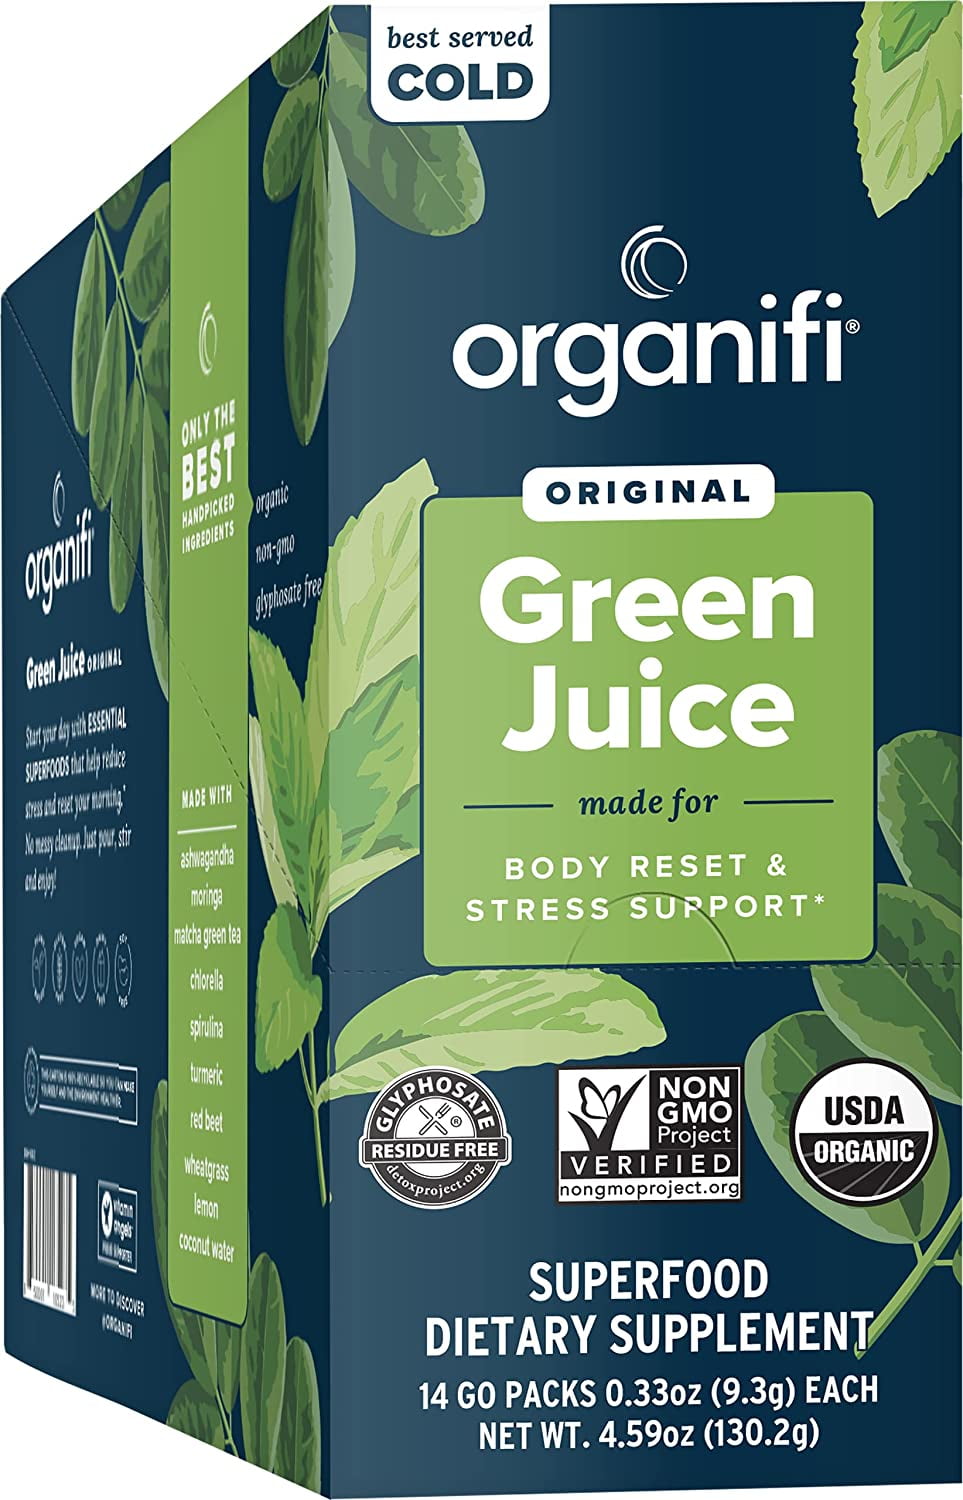 Organifi Green Juice Review: Benefits, Drawbacks, And Cost for Beginners